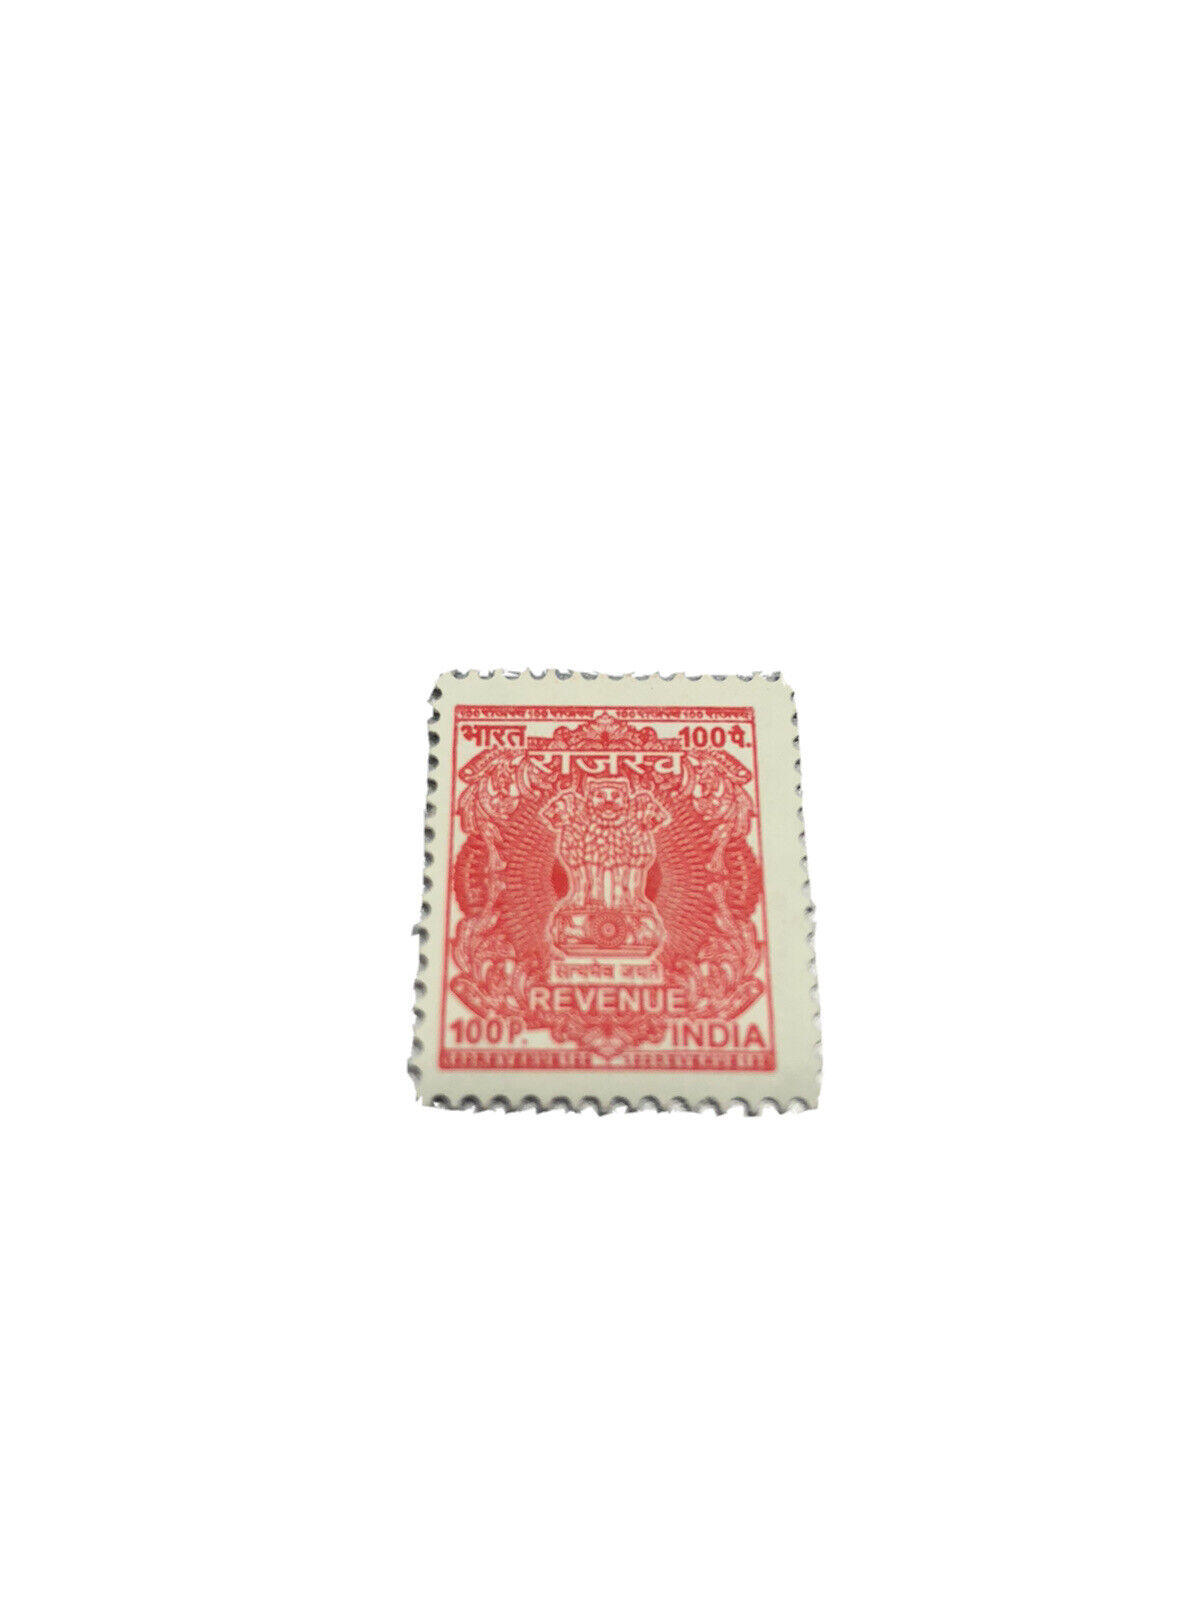 Indian Revenue Stamps 1 Rupee / 100paise